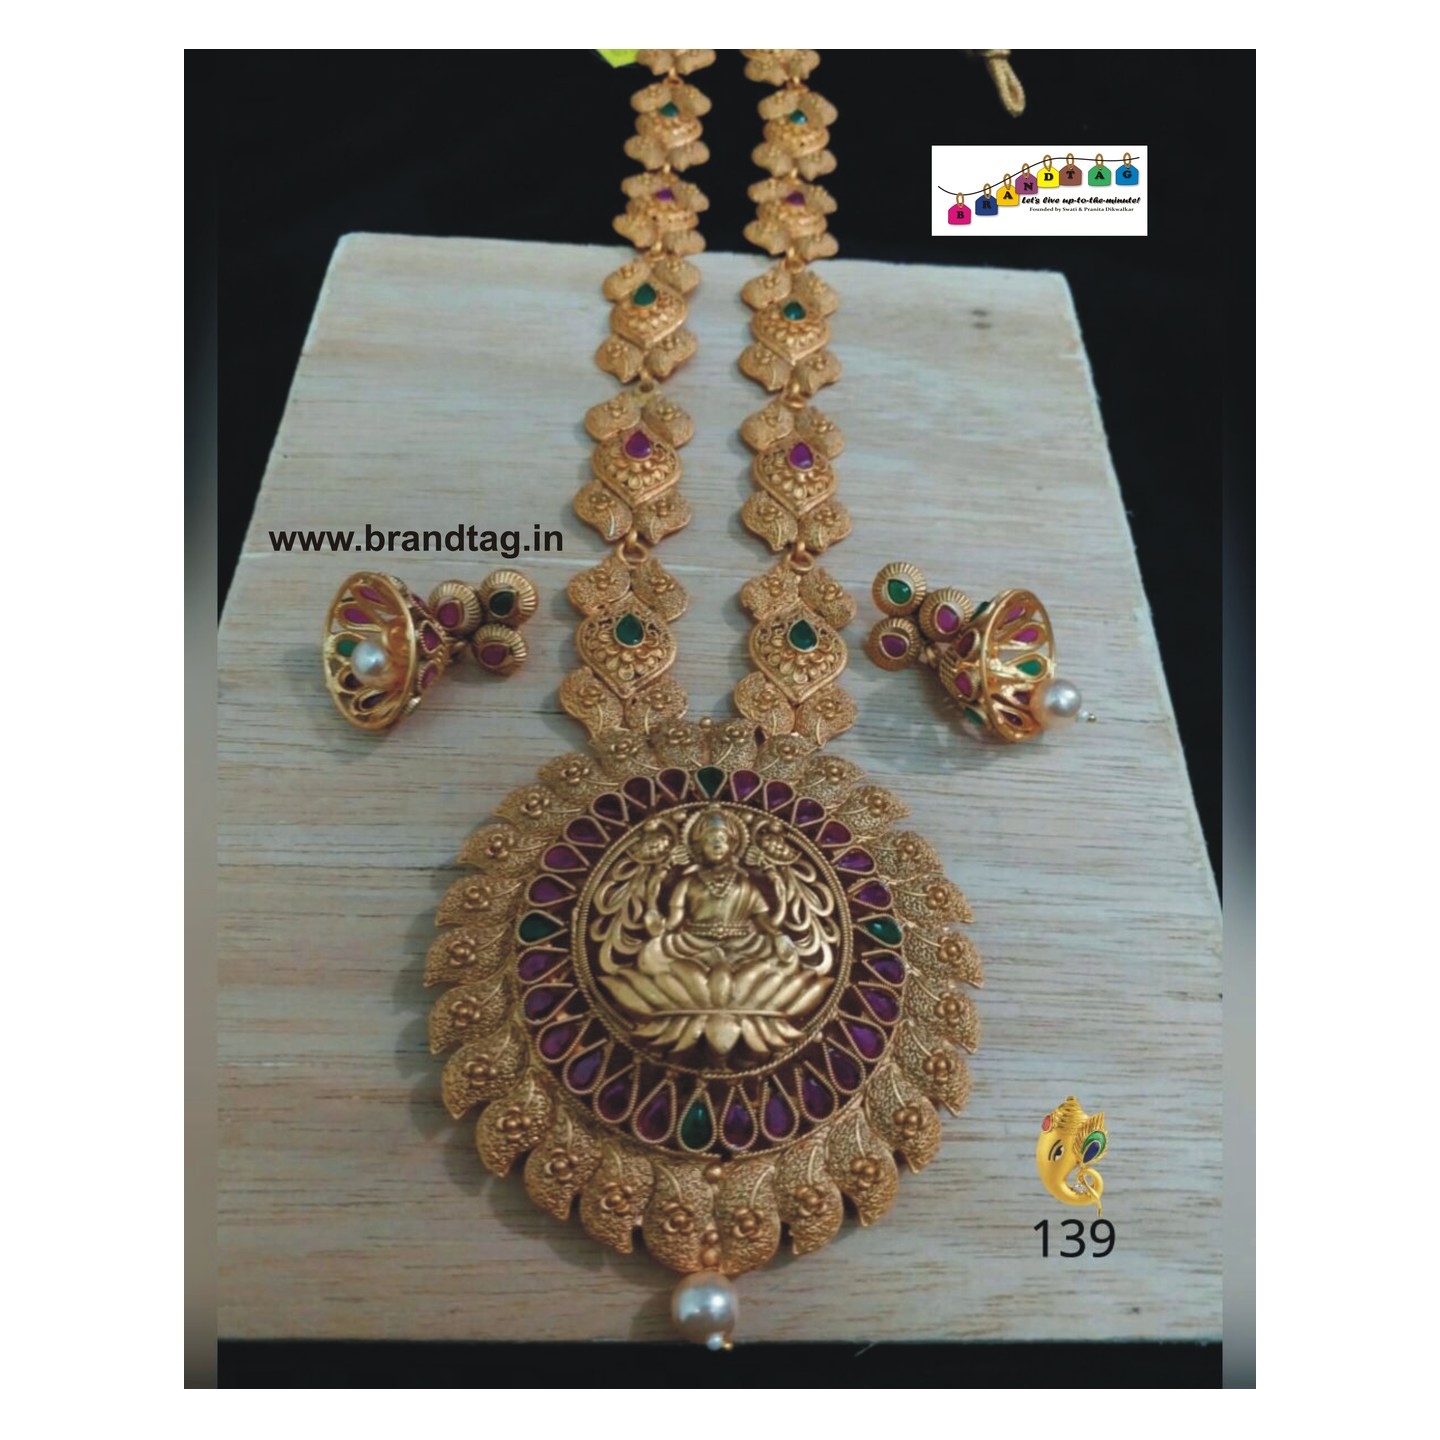 Finely Beautiful Baahubali Divine Temple Long Necklace Set!!! 